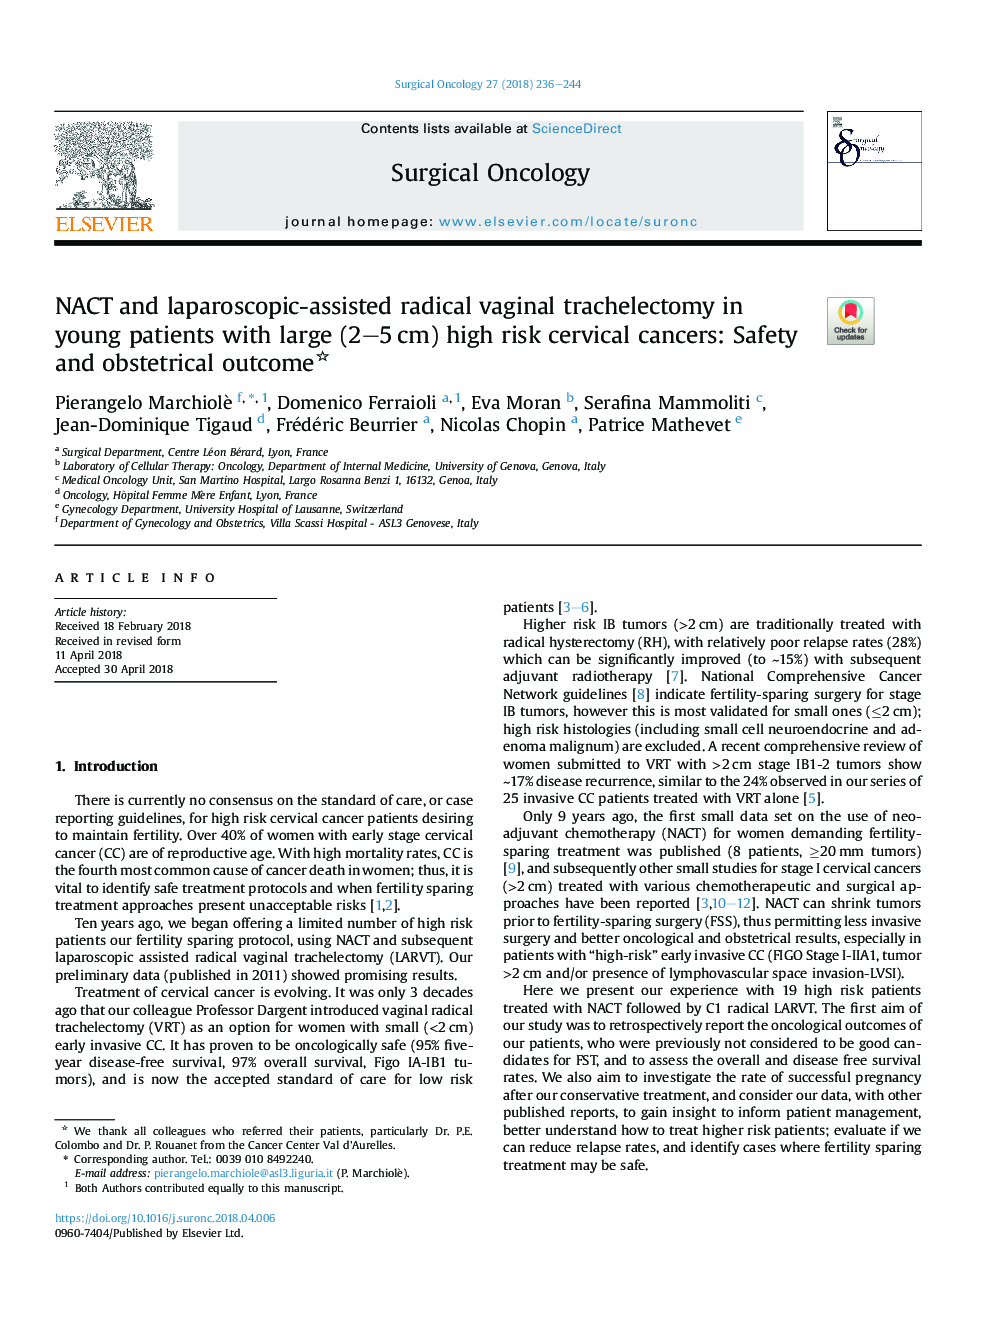 NACT and laparoscopic-assisted radical vaginal trachelectomy in young patients with large (2-5â¯cm) high risk cervical cancers: Safety and obstetrical outcome